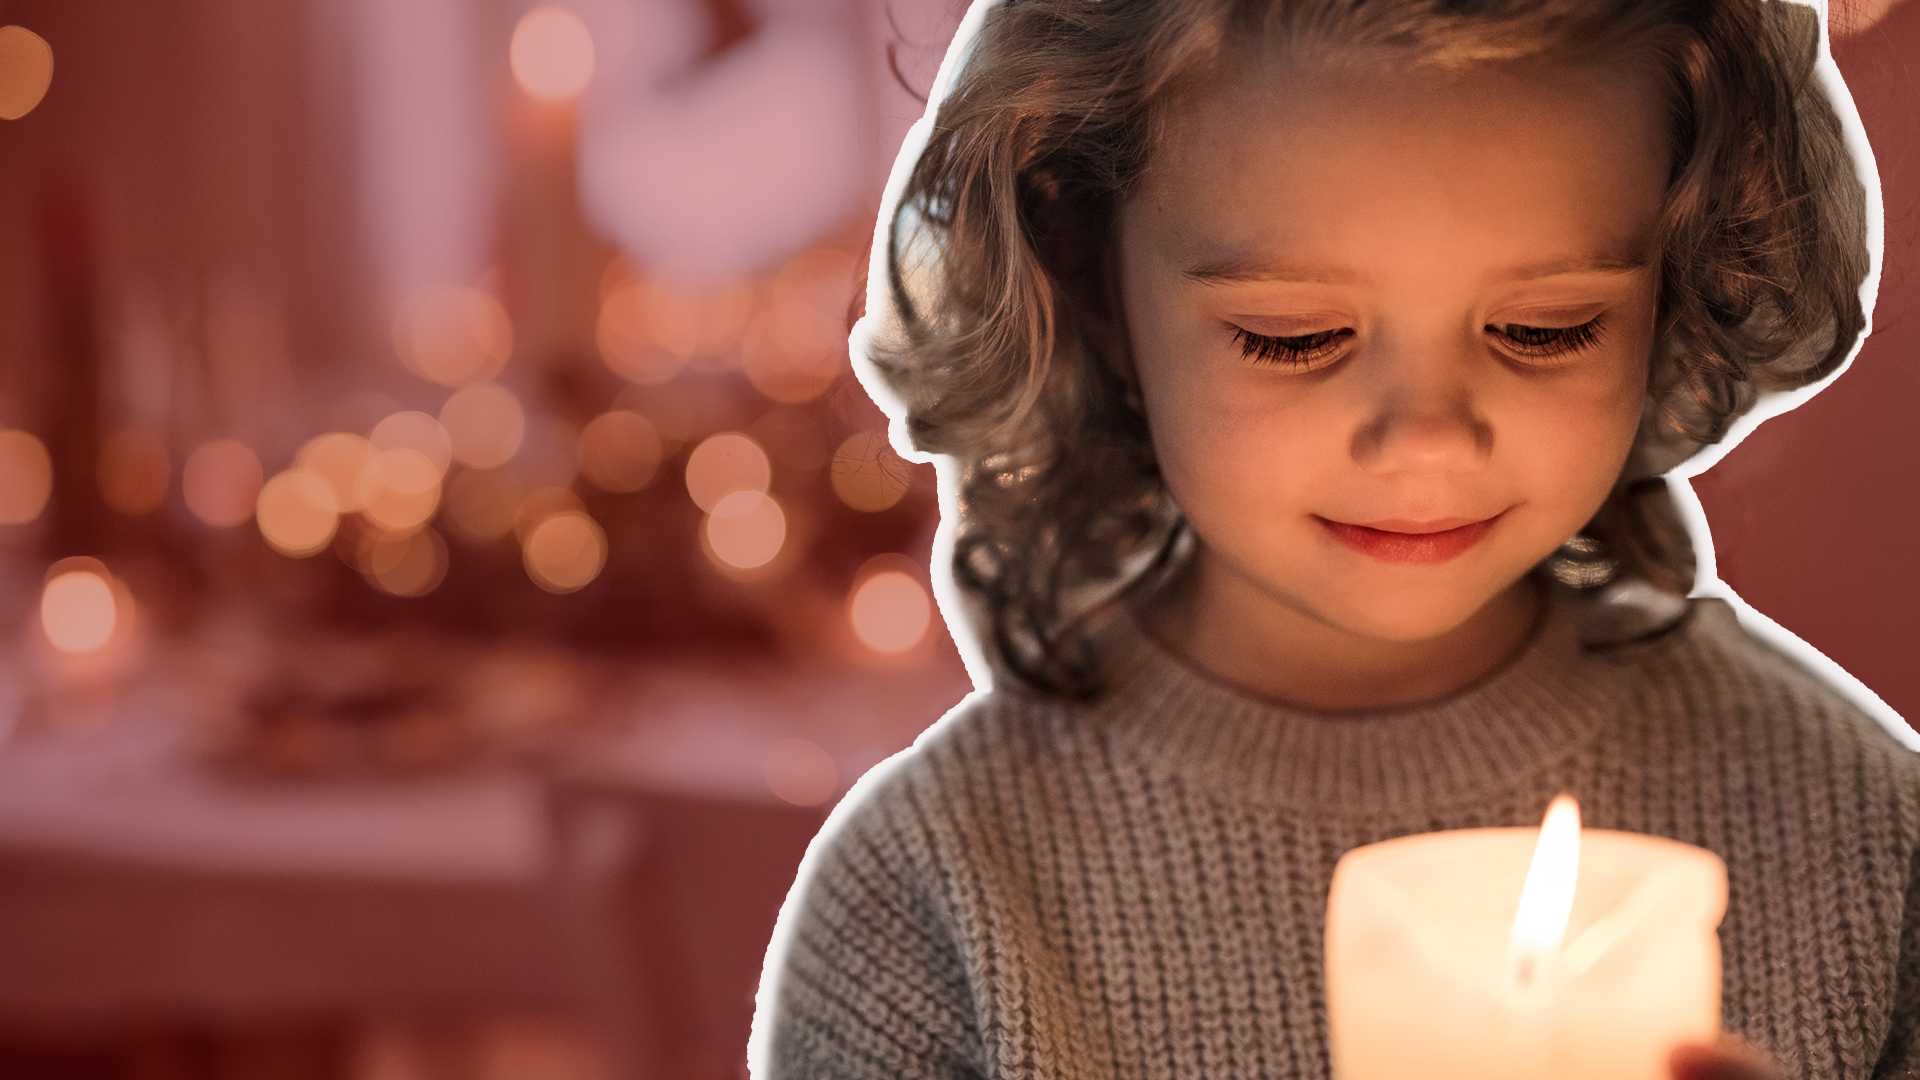 Young child holds a lit candle with christmas decorations in the background